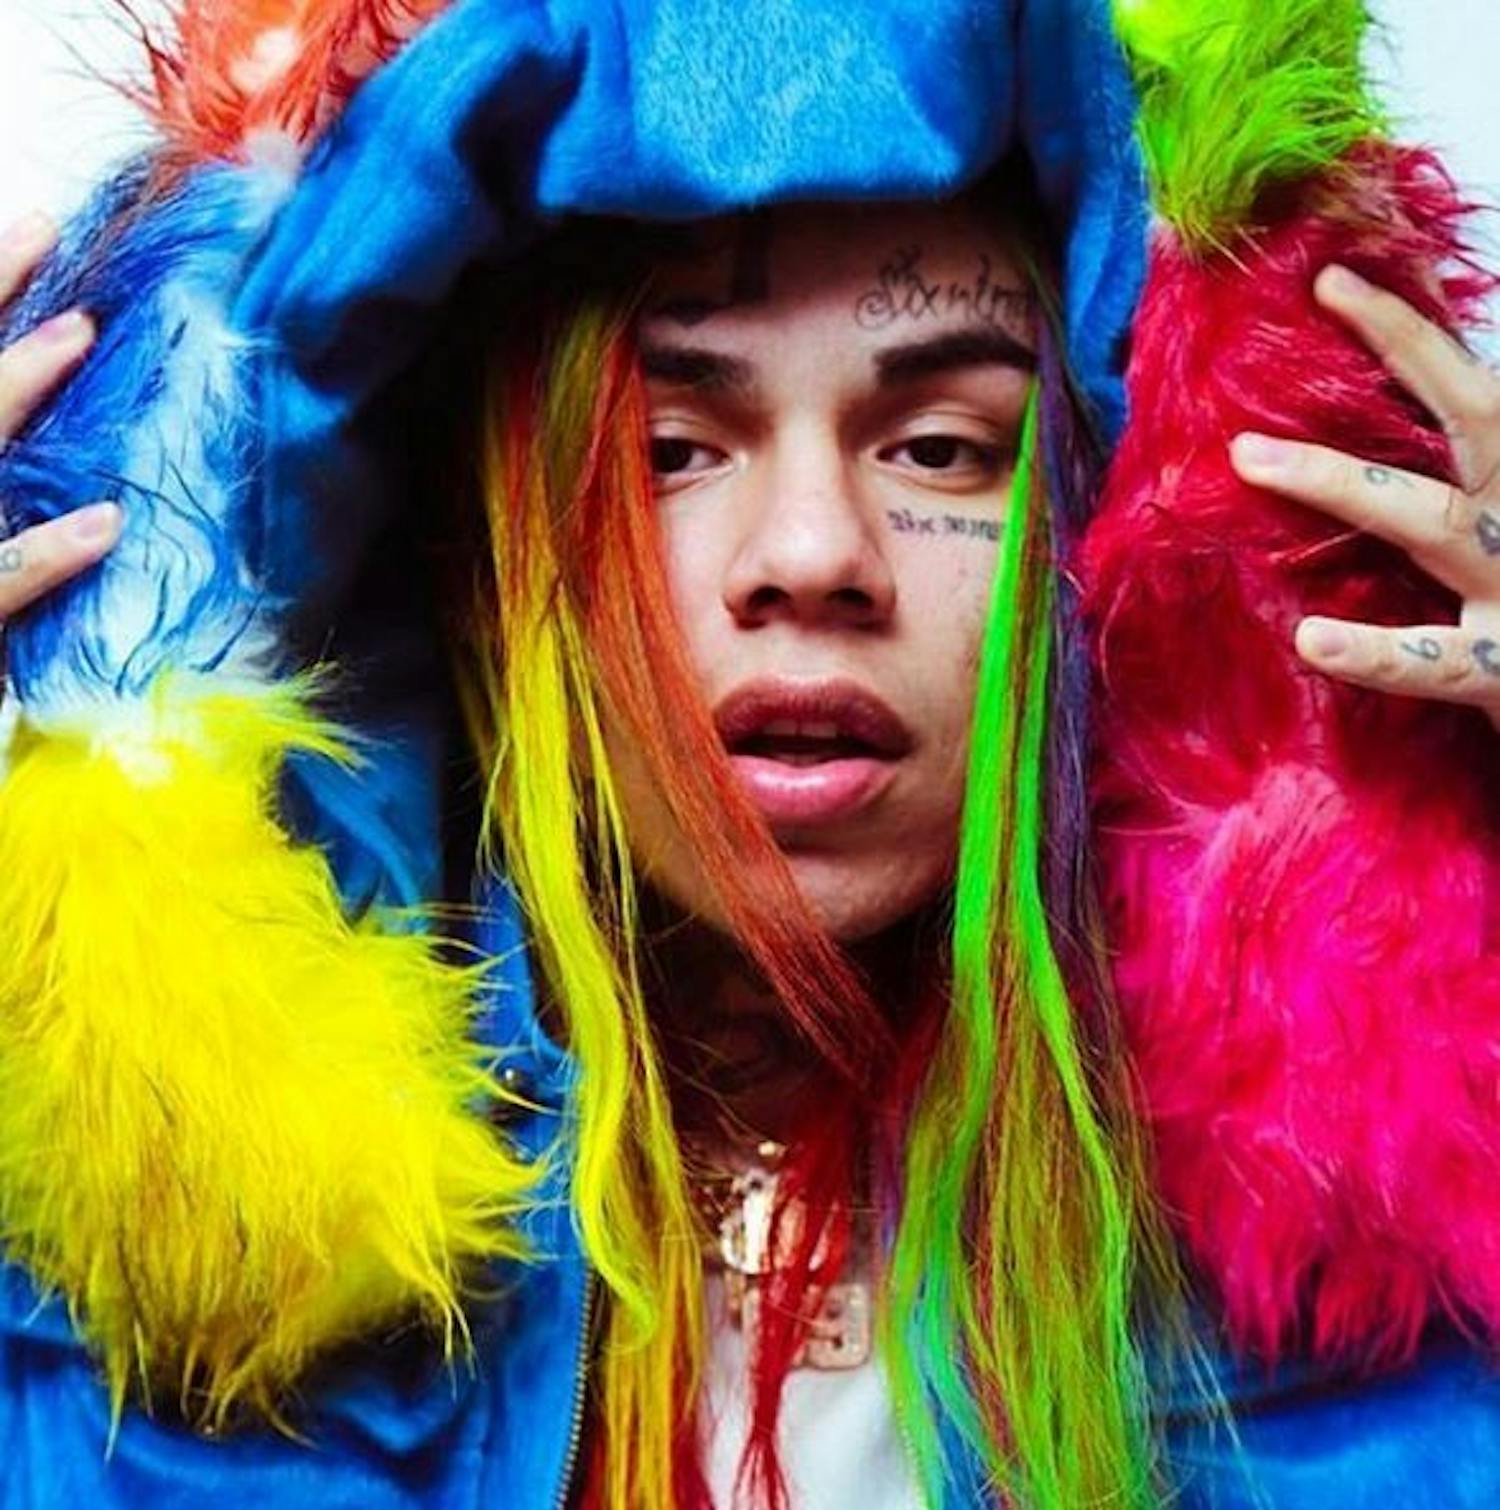 Don't let the bright accents of his eccentric looks fool you &mdash; 6ix9ine has a dark history.